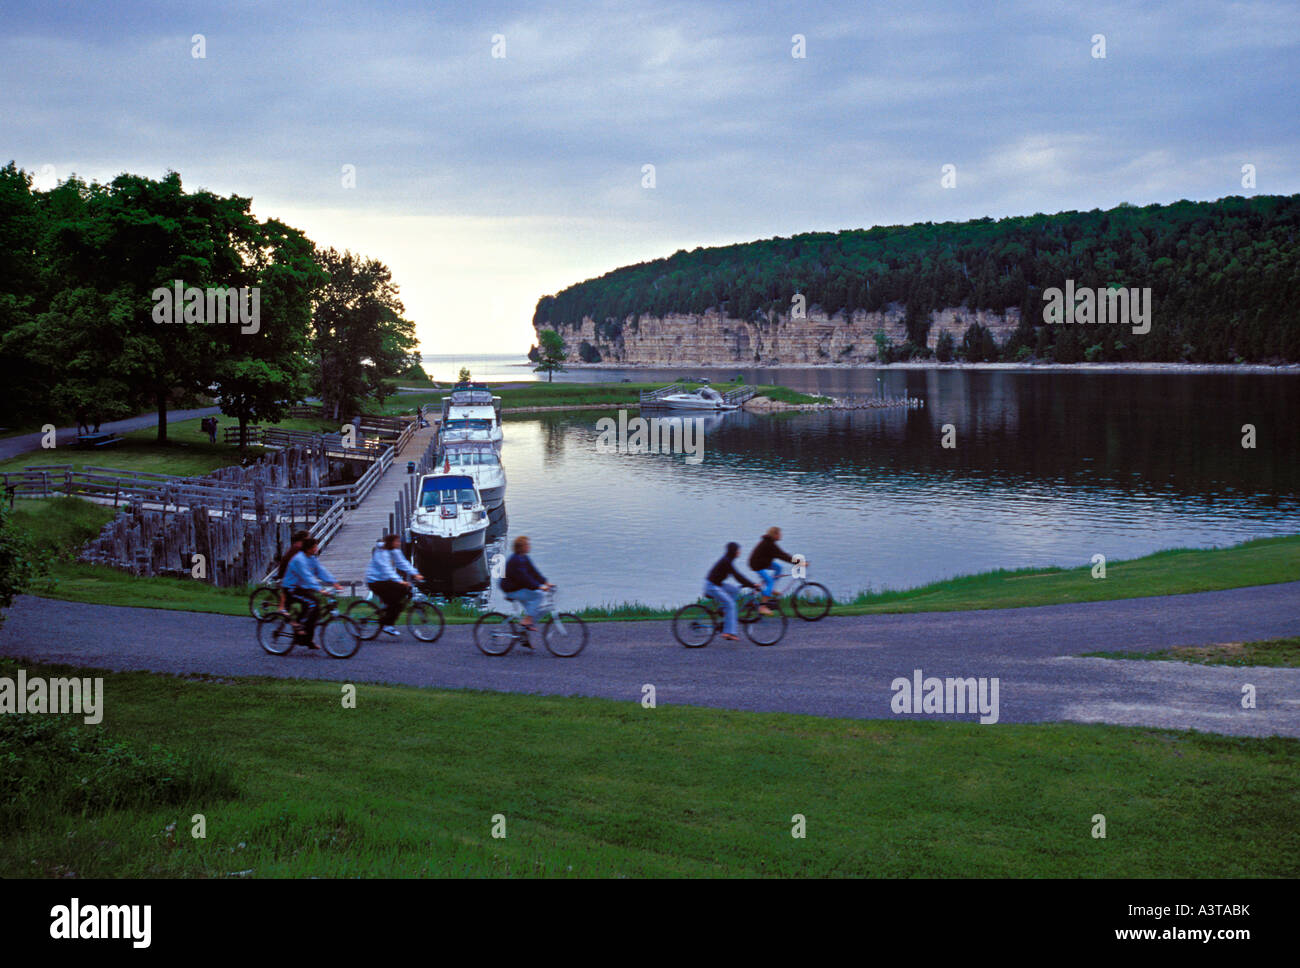 A FAMILY BIKES PAST BOATS DOCKED IN SNAIL SHELL HARBOR AT FAYETTE STATE HISTORIC PARK ON THE GARDEN PENINSULA Stock Photo